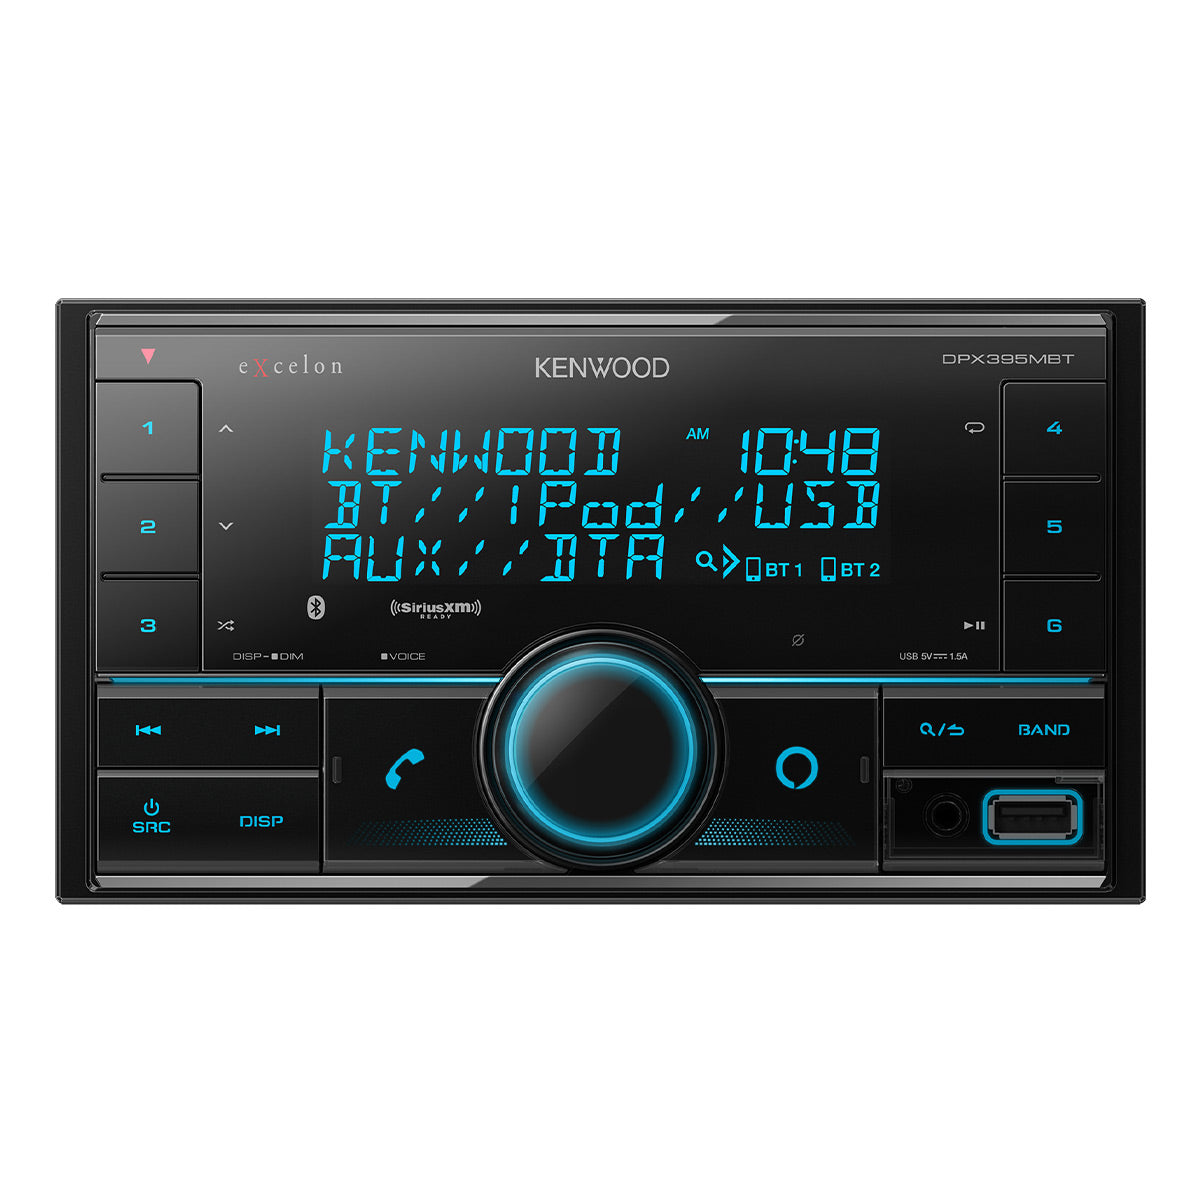 Kenwood DPX395MBT eXcelon Digital Media Receiver with Bluetooth and Amazon Alexa Built-In